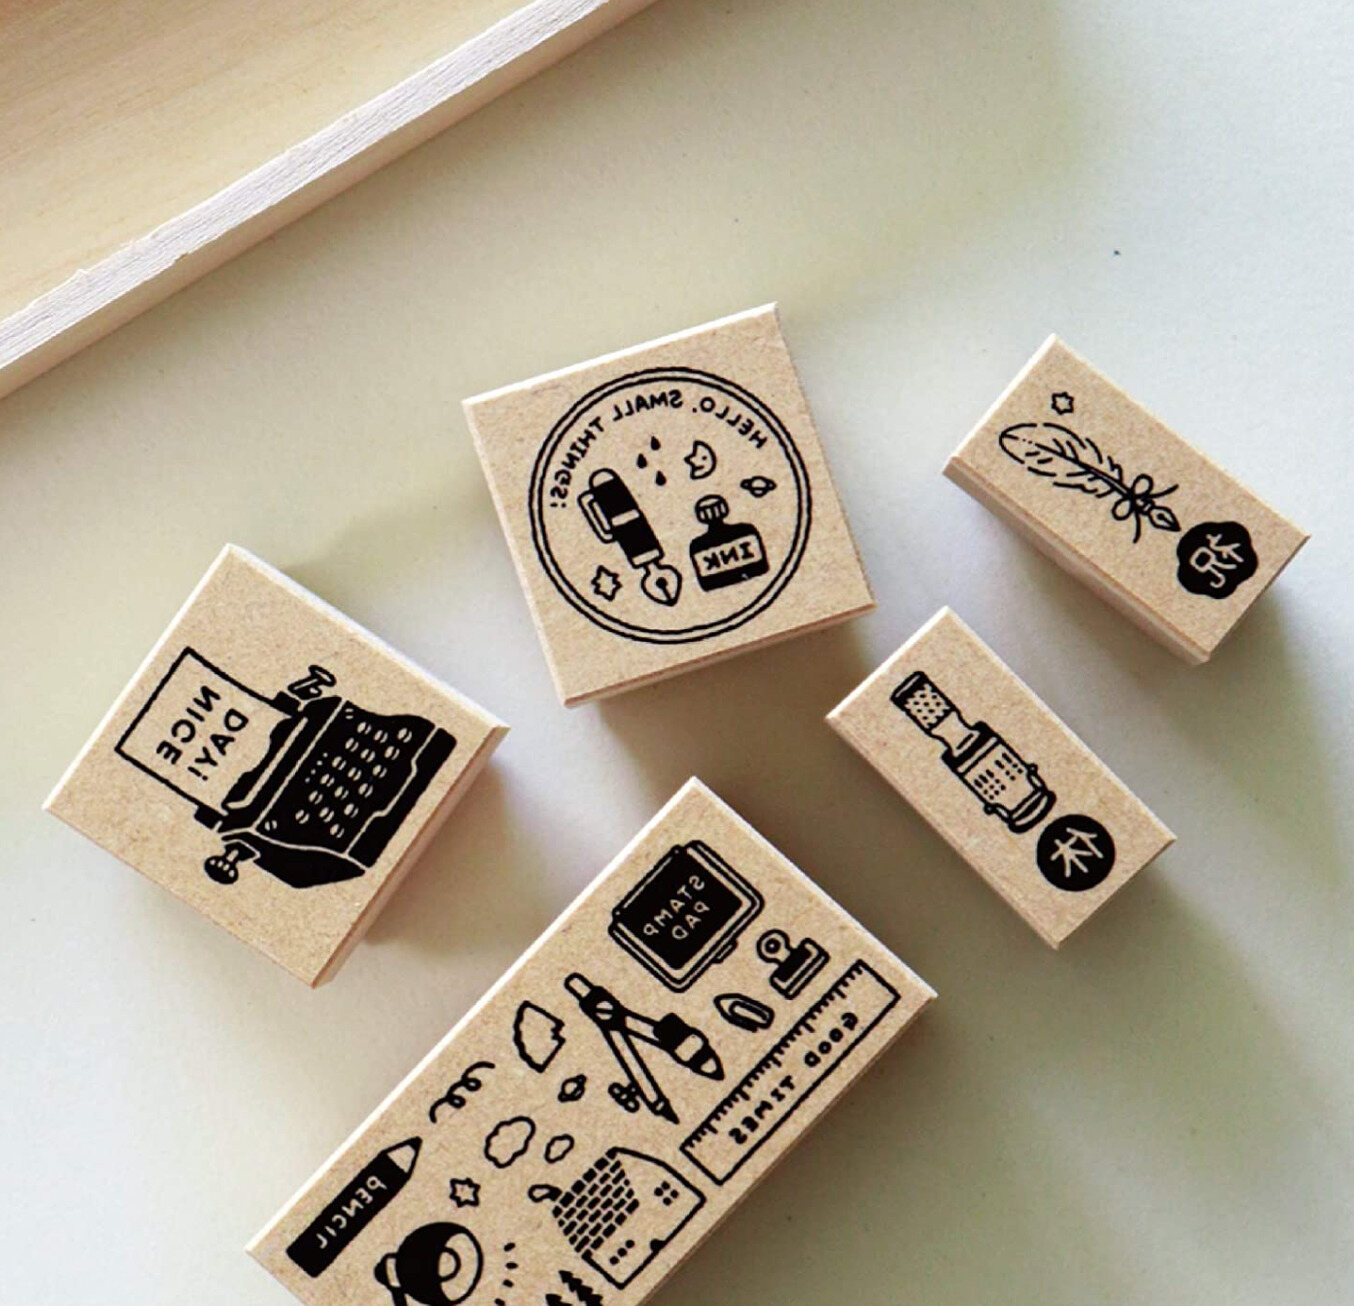 Stamp Set Review: Perfect for Her Crafting Needs